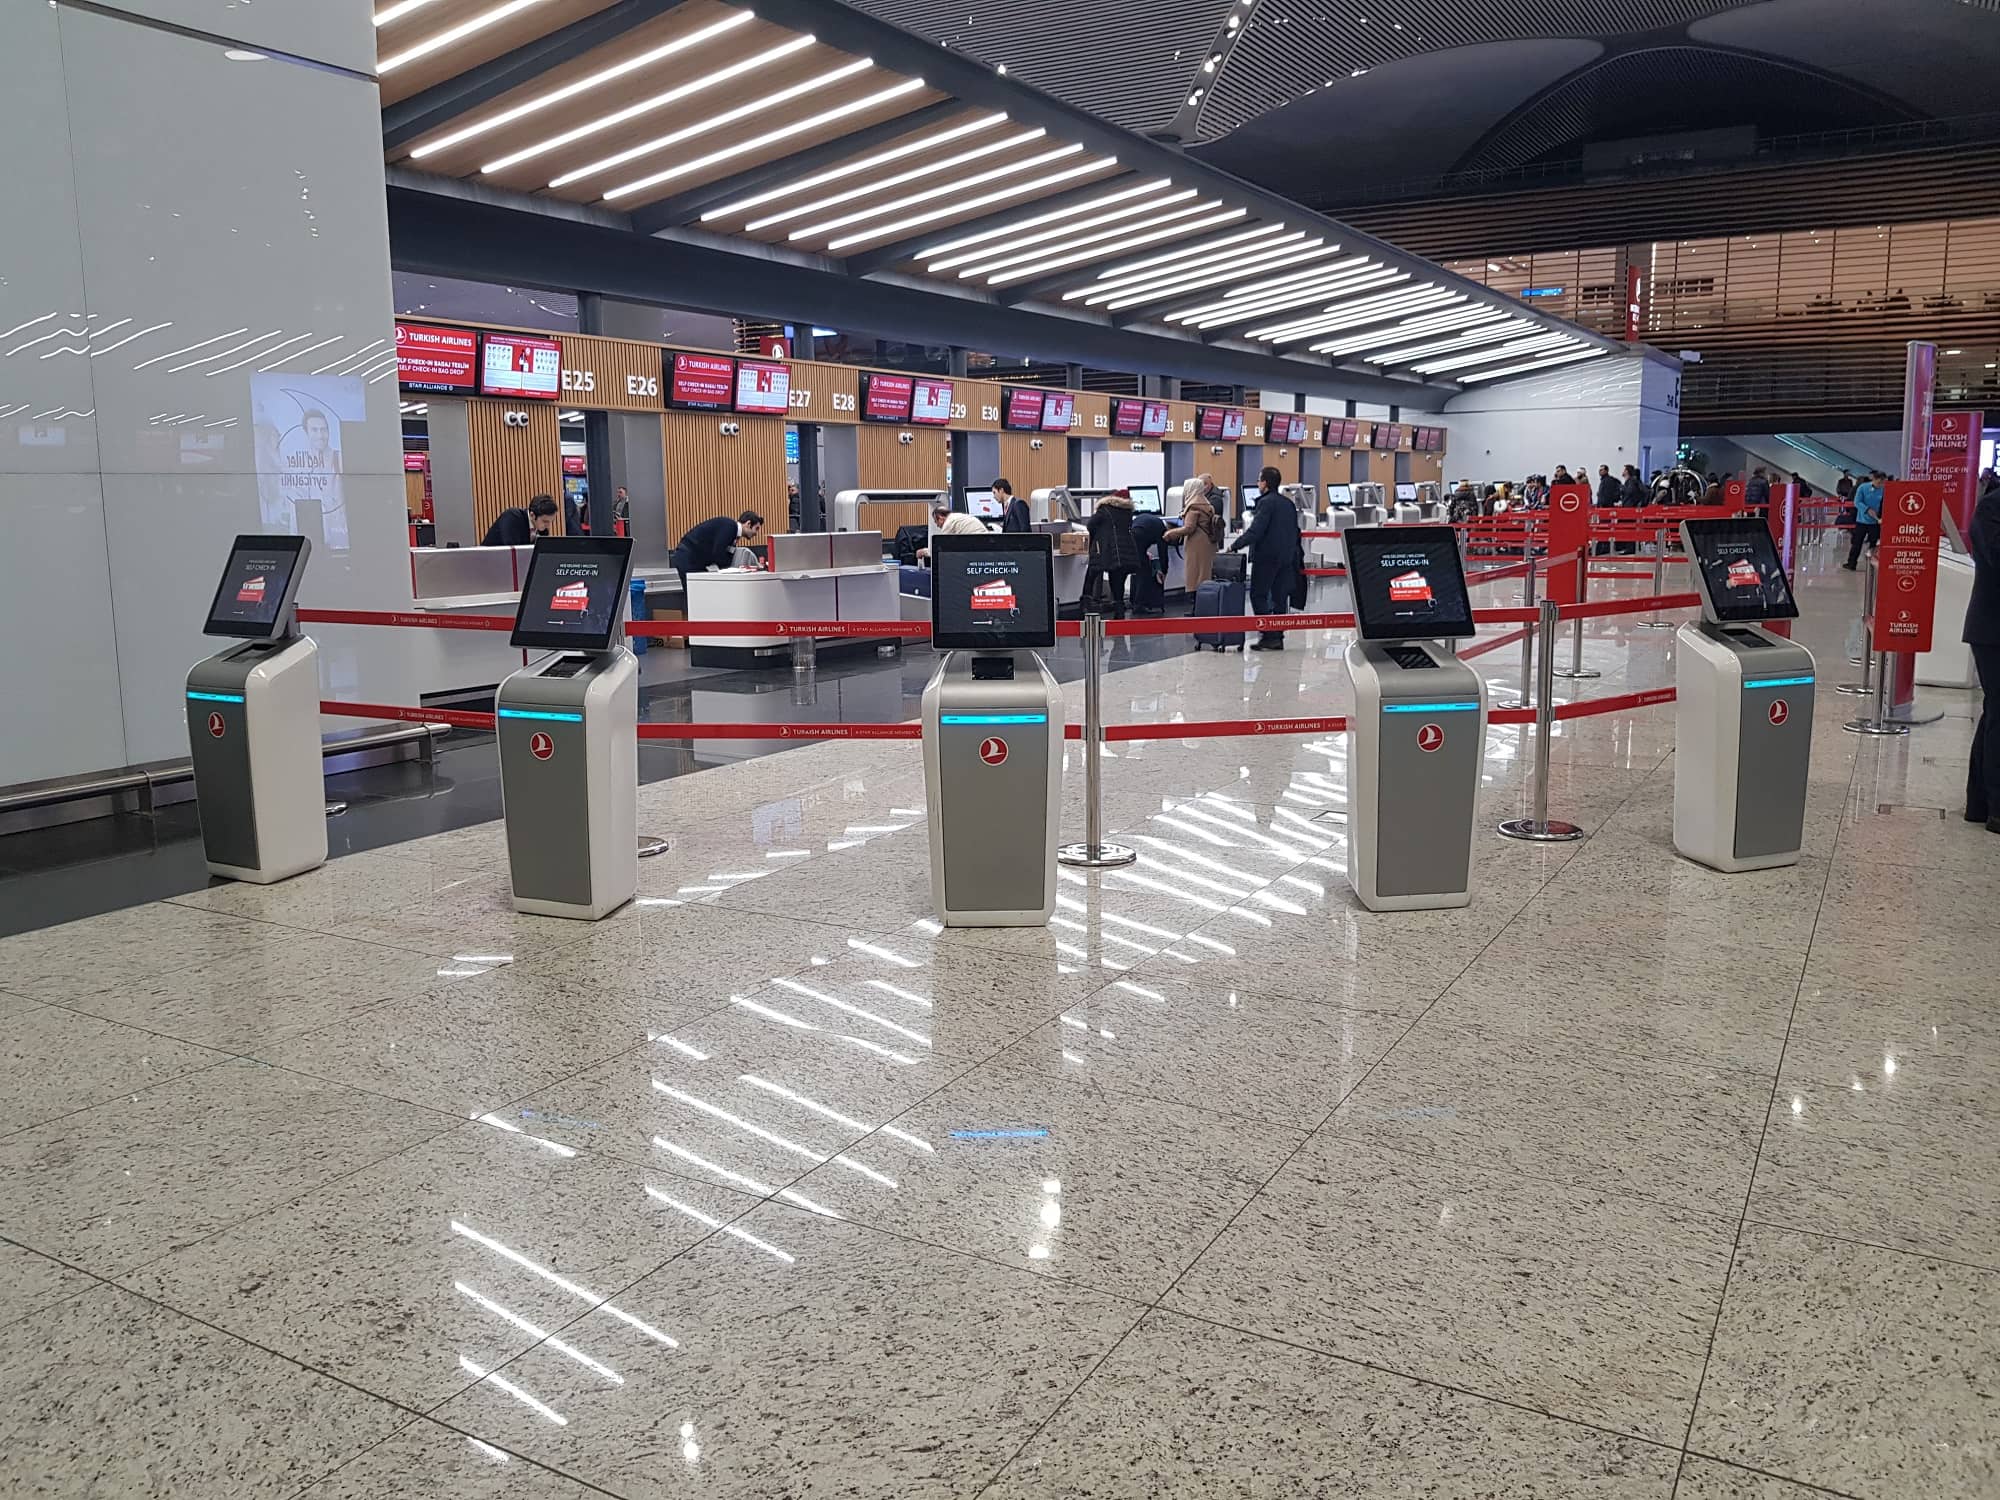 Turkish Airlines Check-in Kiosk 